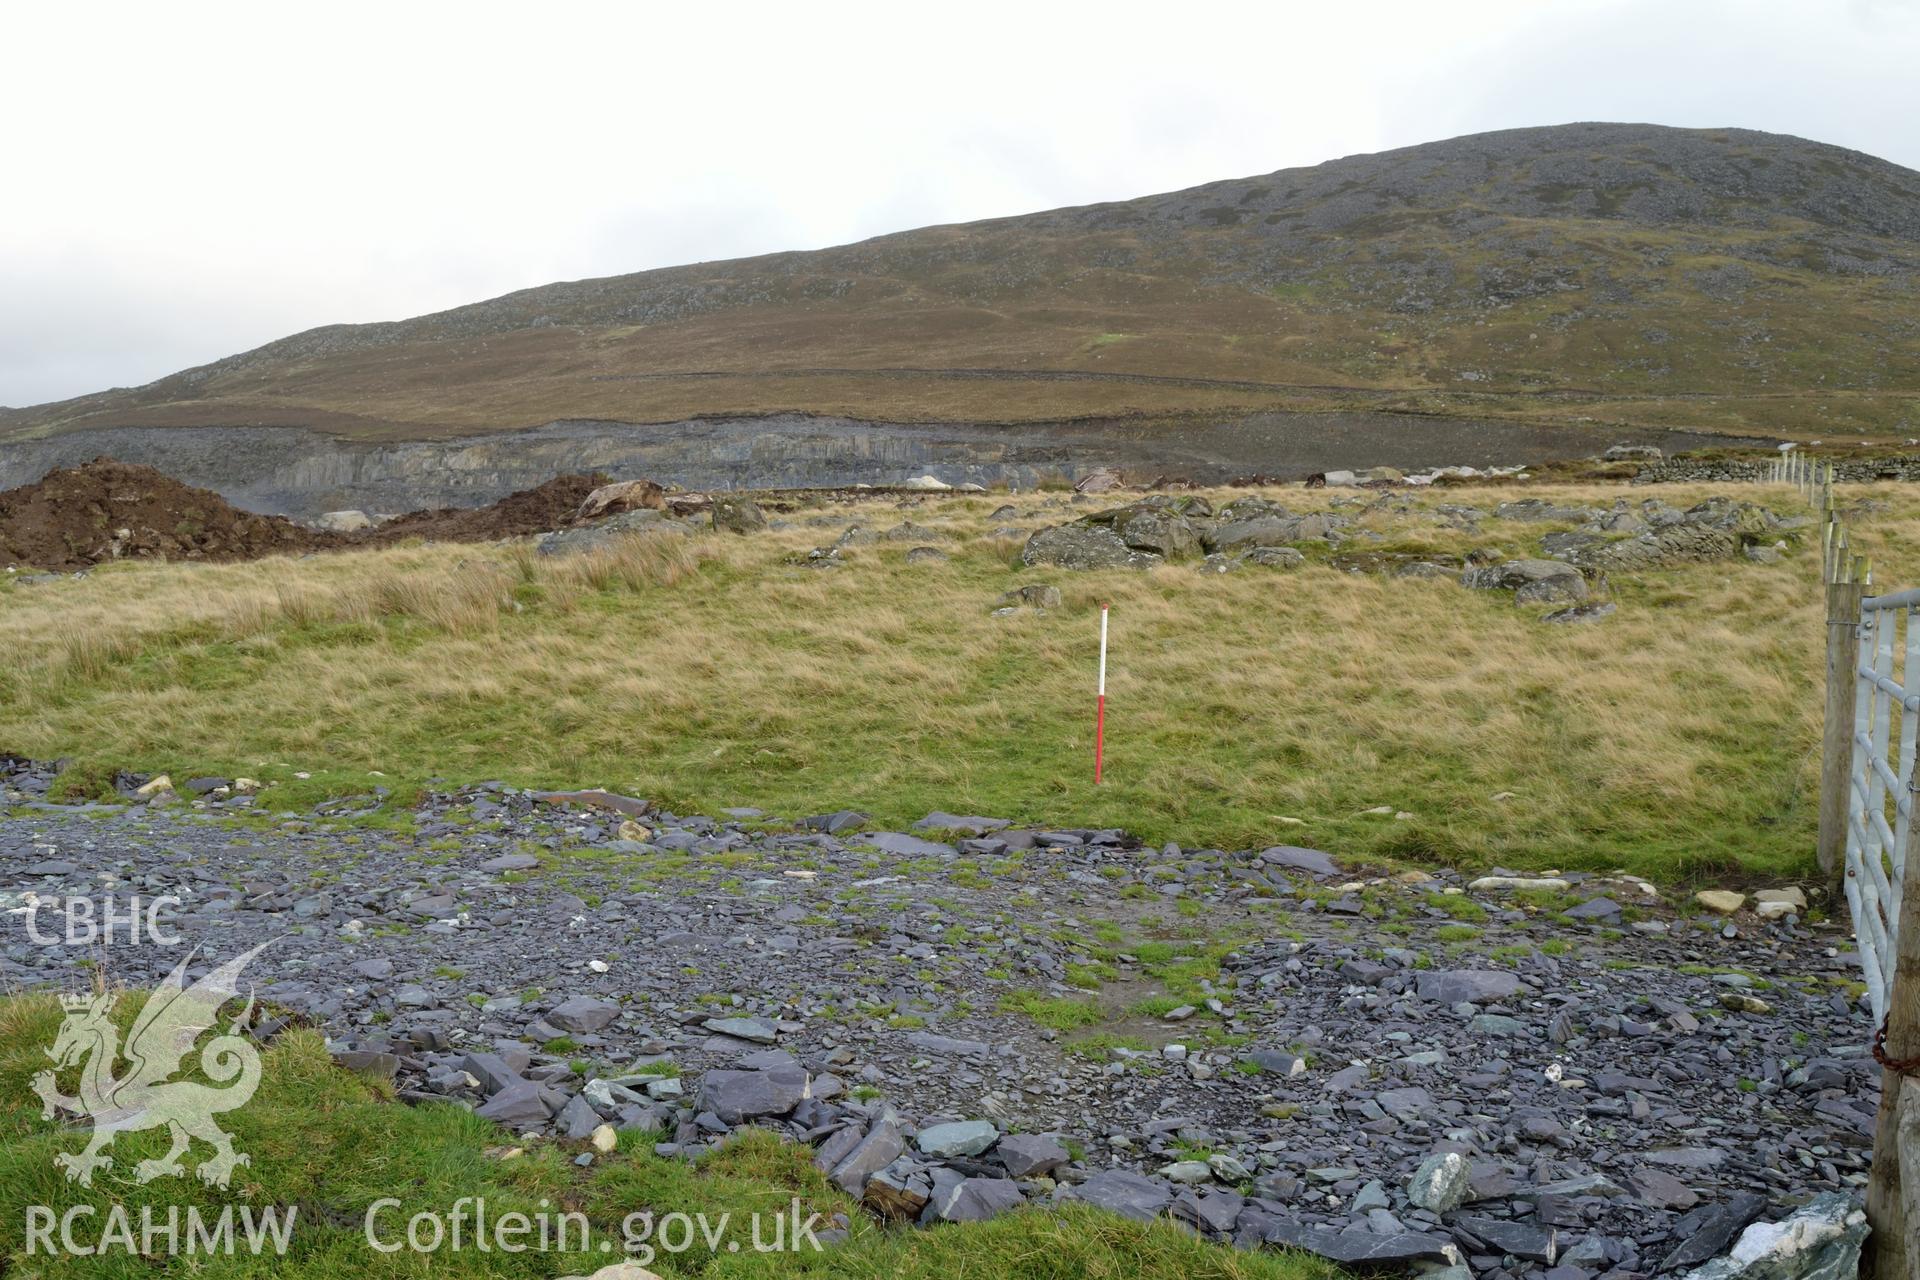 Digital photograph showing view from north west of the area not stripped with trackway in foreground at Penrhyn Quarry, Bethesda. Taken as part of photographic survey conducted by Gwynedd Archaeological Trust on 9th November 2017. Project no. 2541.